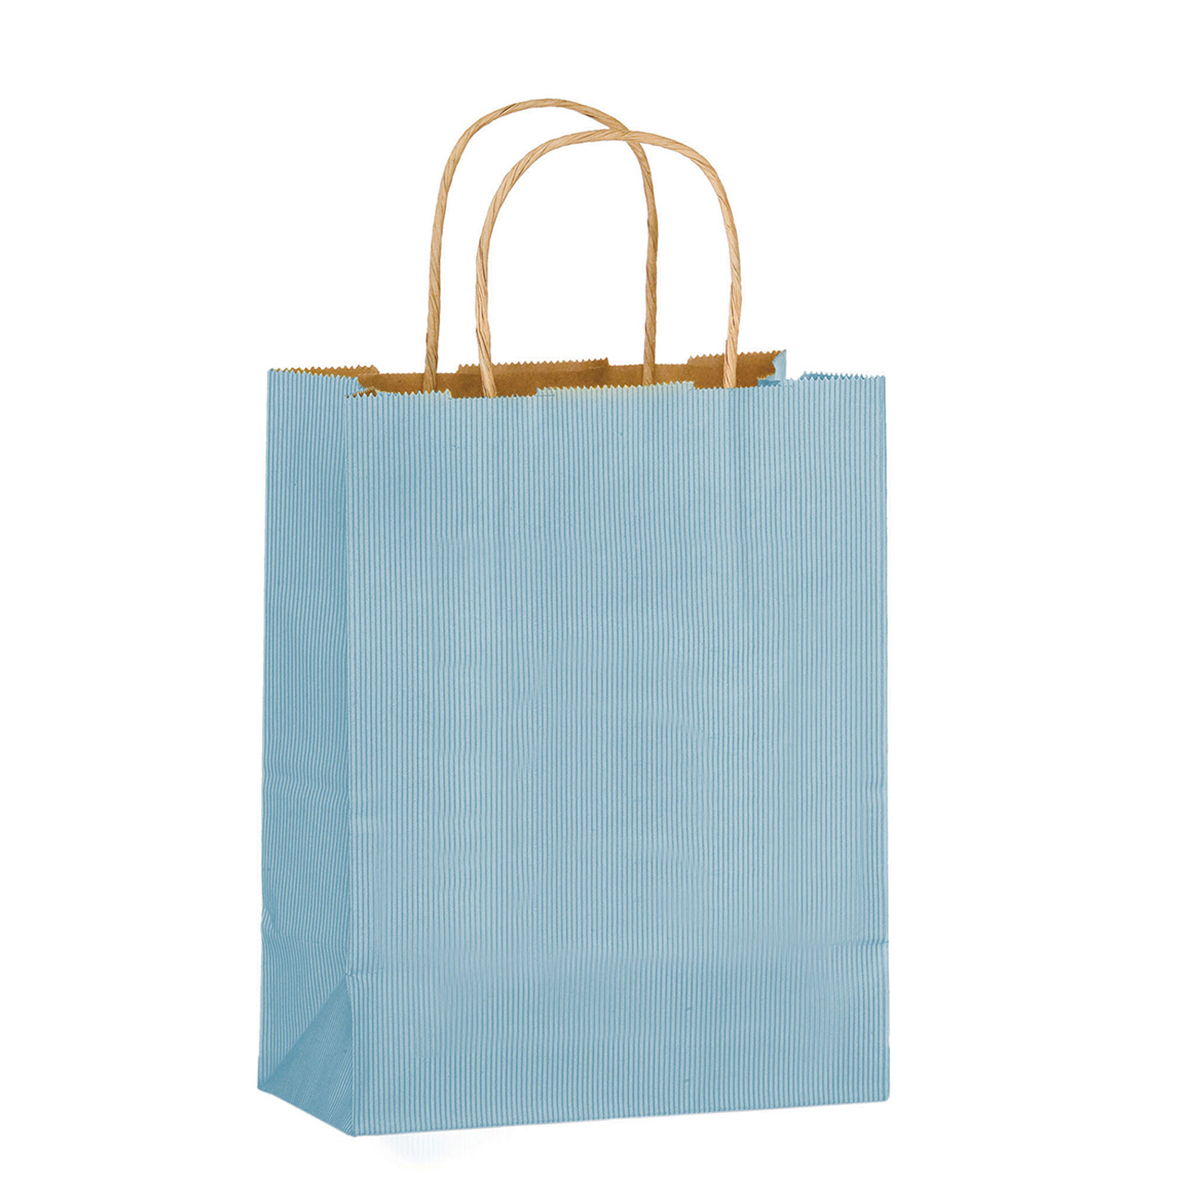 Country Blue Matte Colored Shoppers (8"W x 4.75"G x 10.5"H) - Flexo Ink